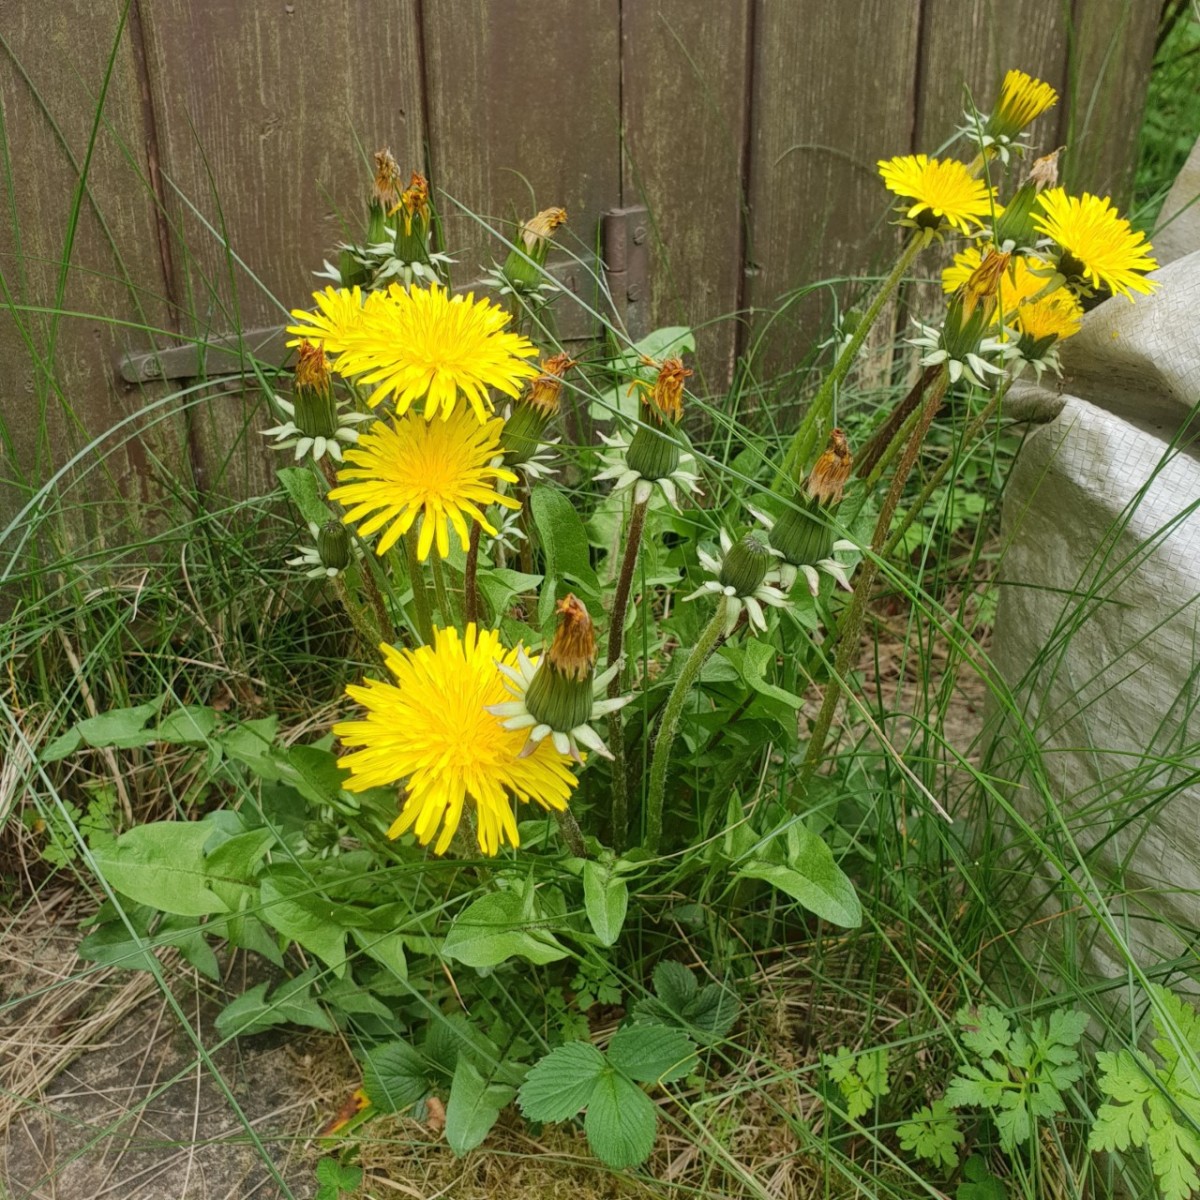 The dandelion, a common garden weed